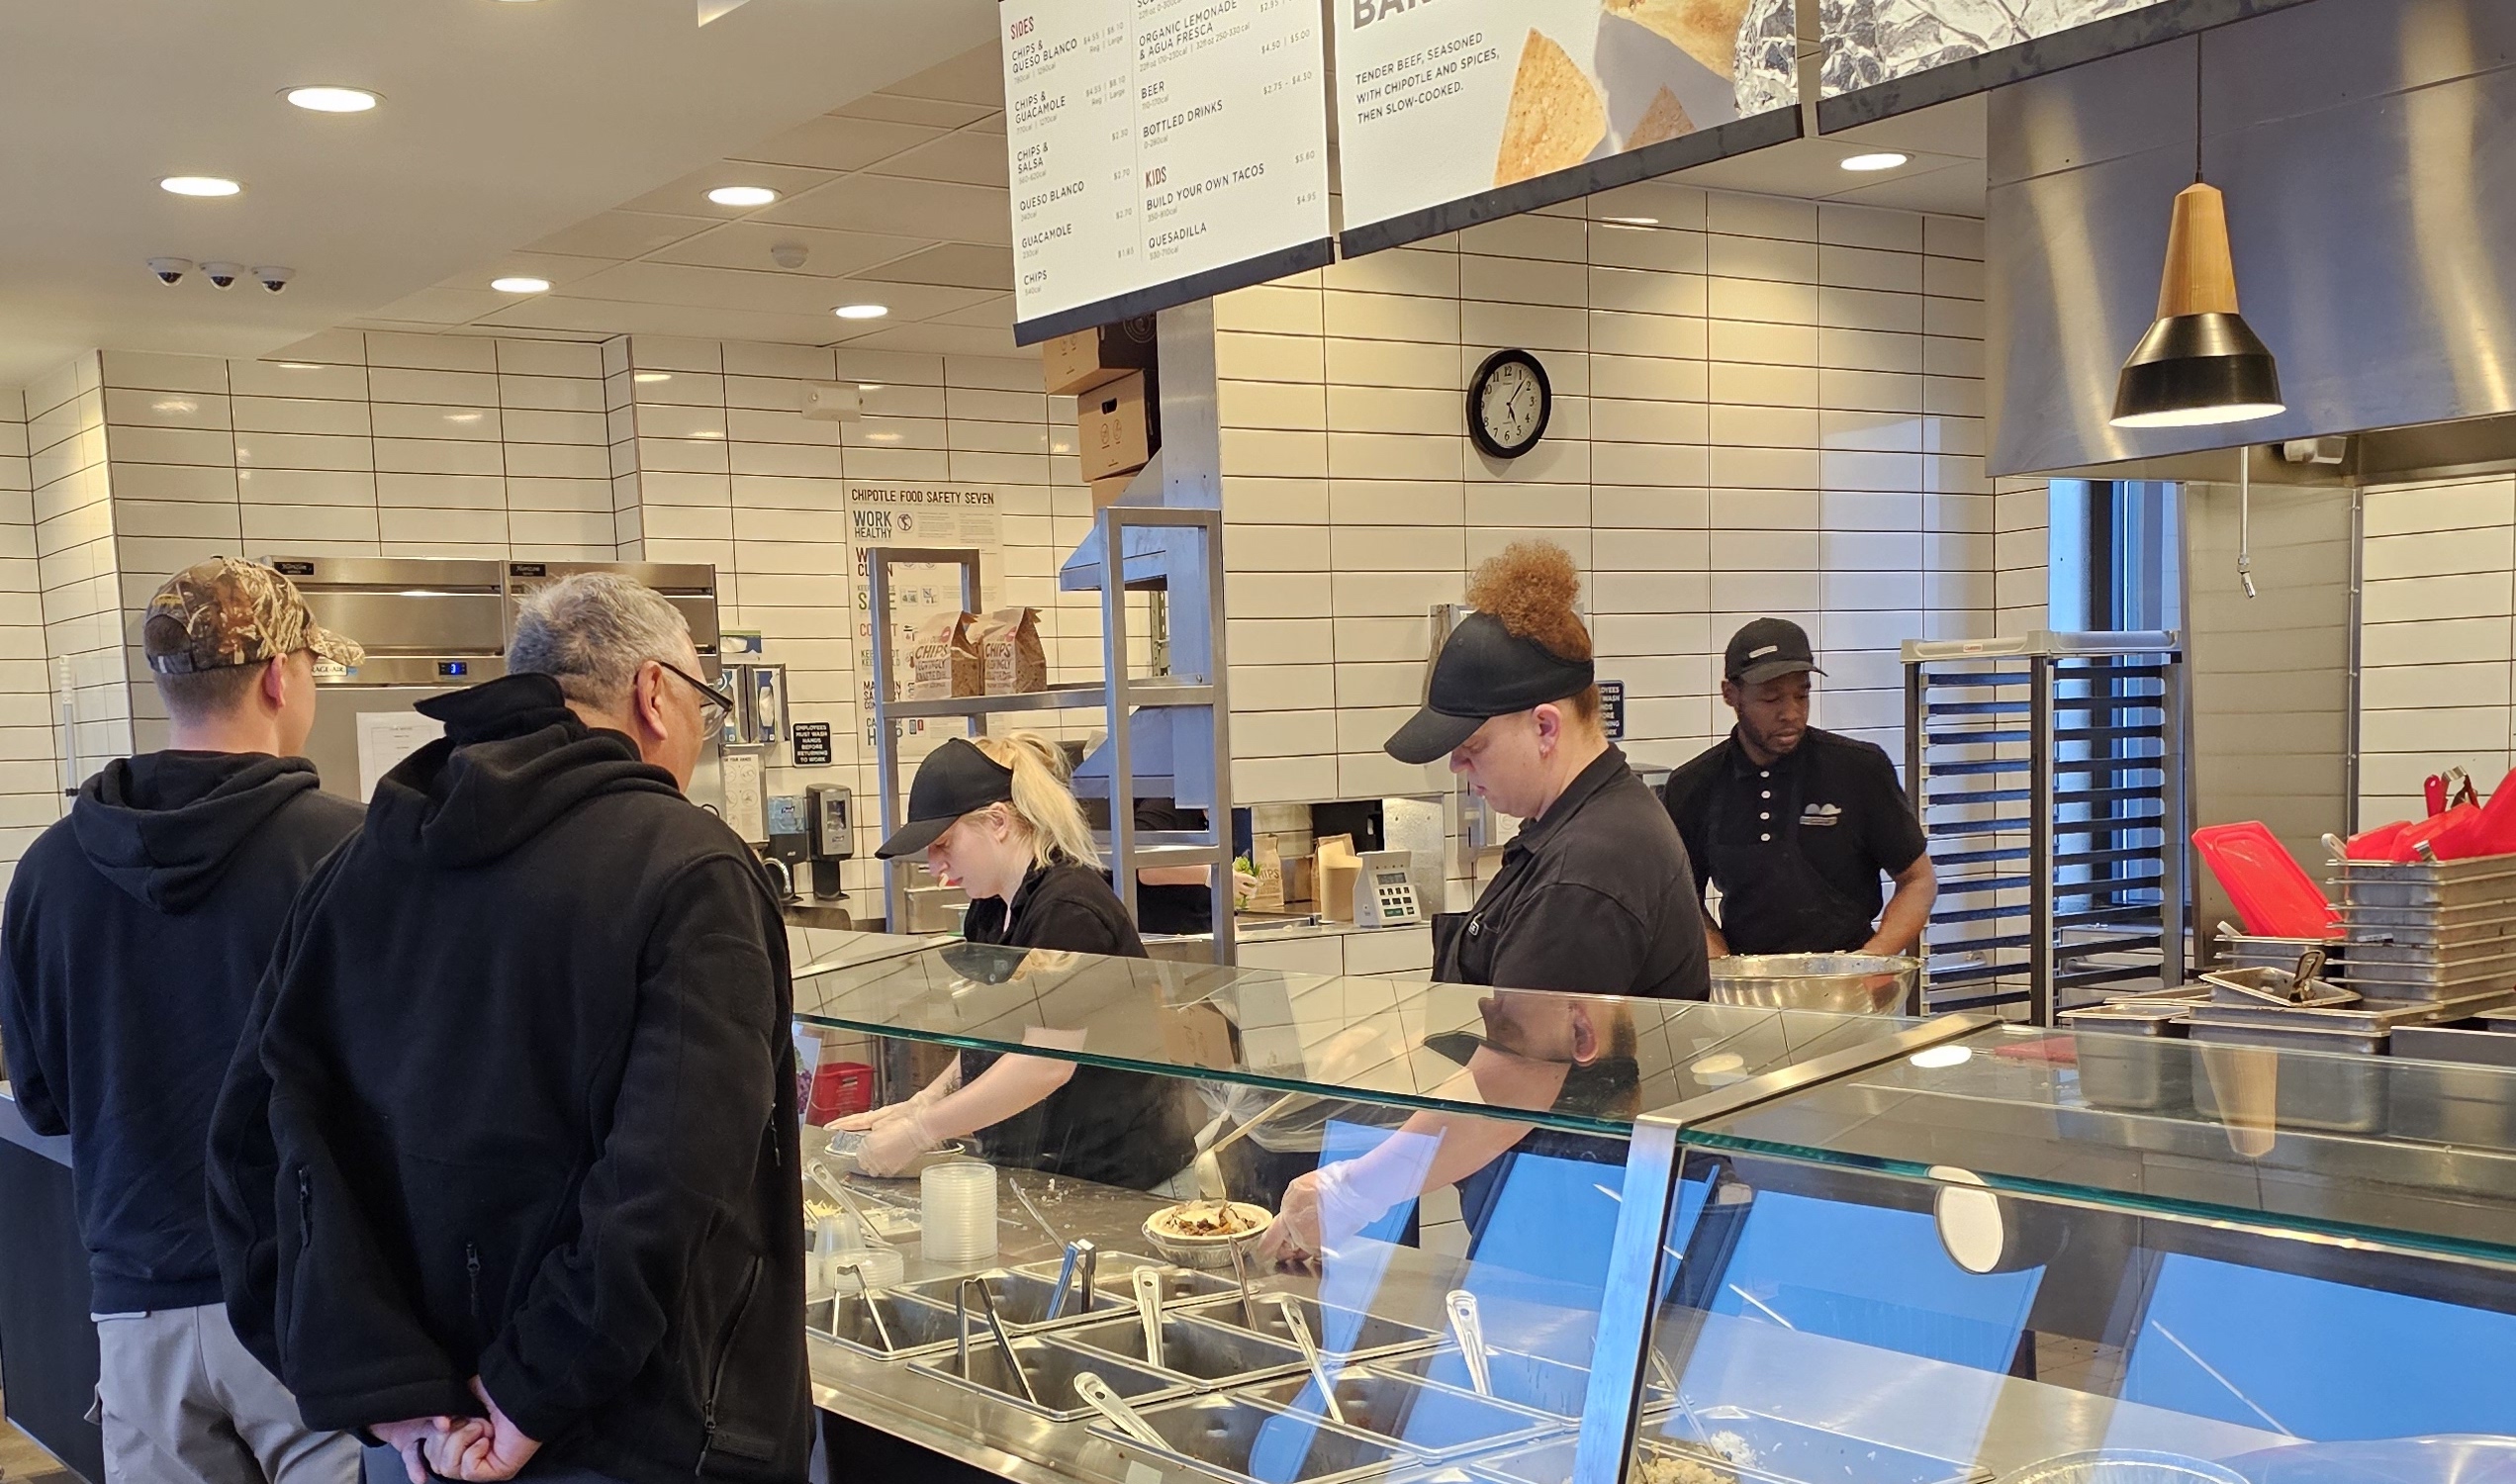  Chipotle staff assisting new customers.